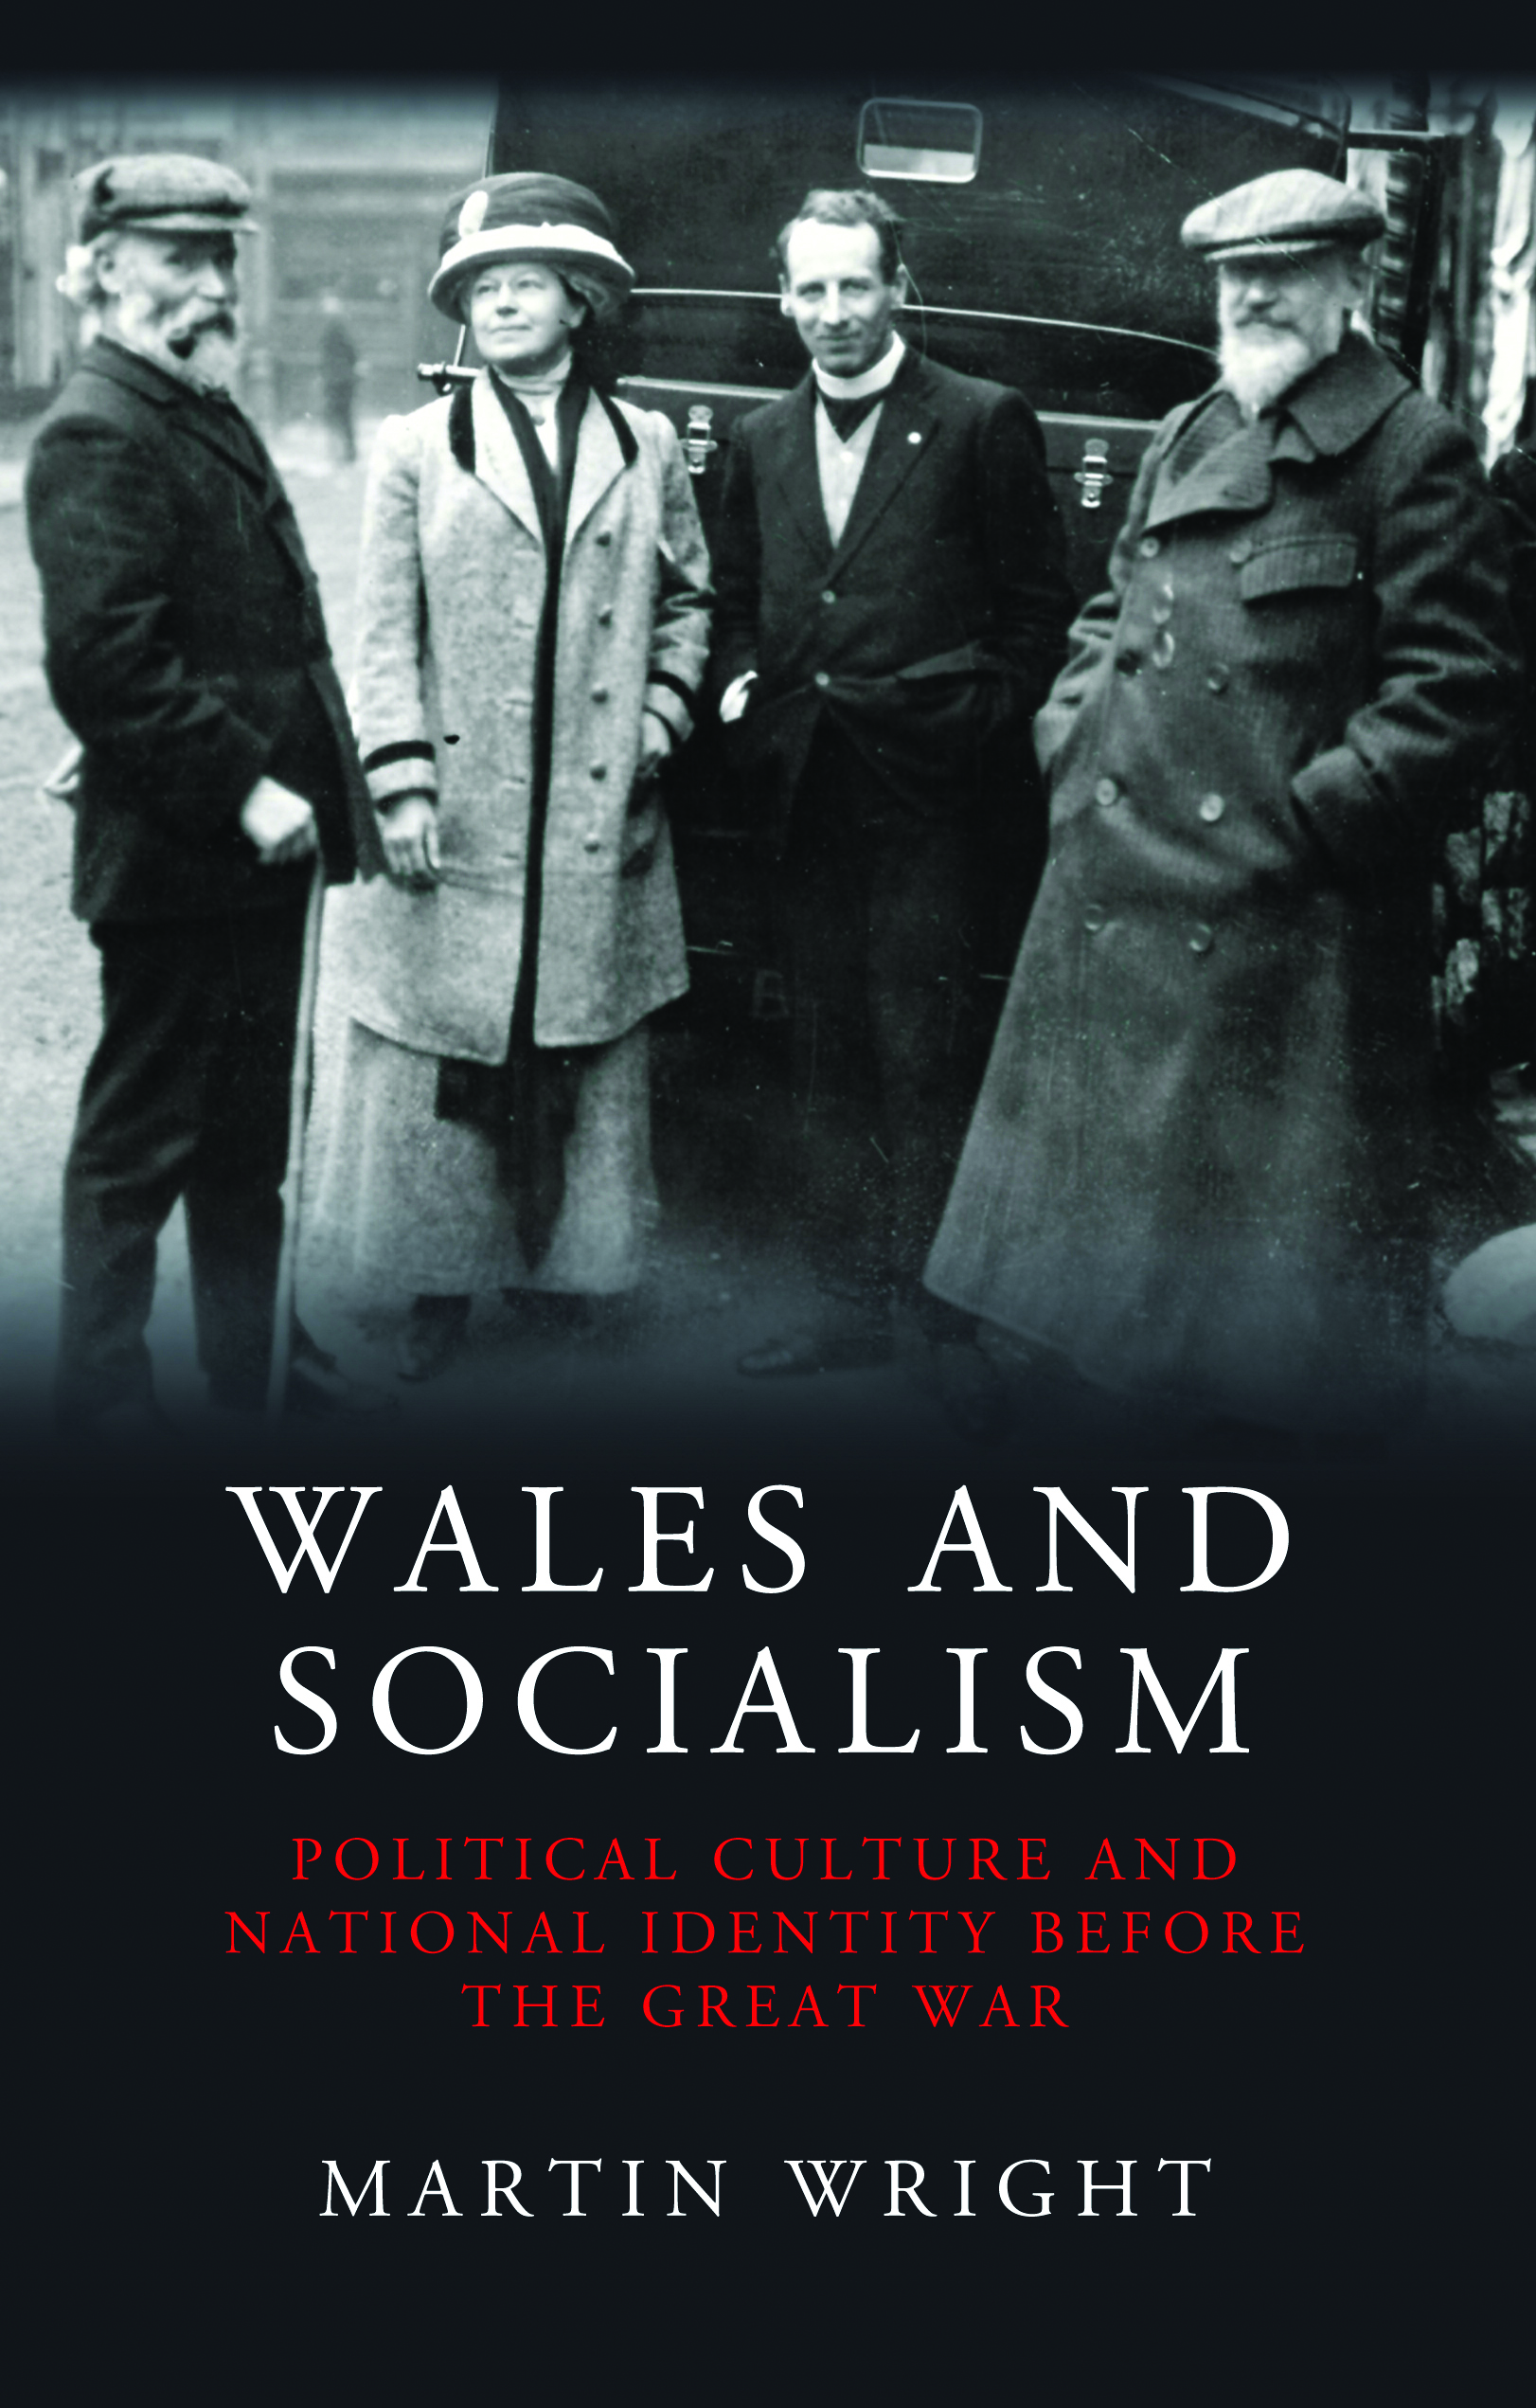 Wales and Socialism by Martin Wright